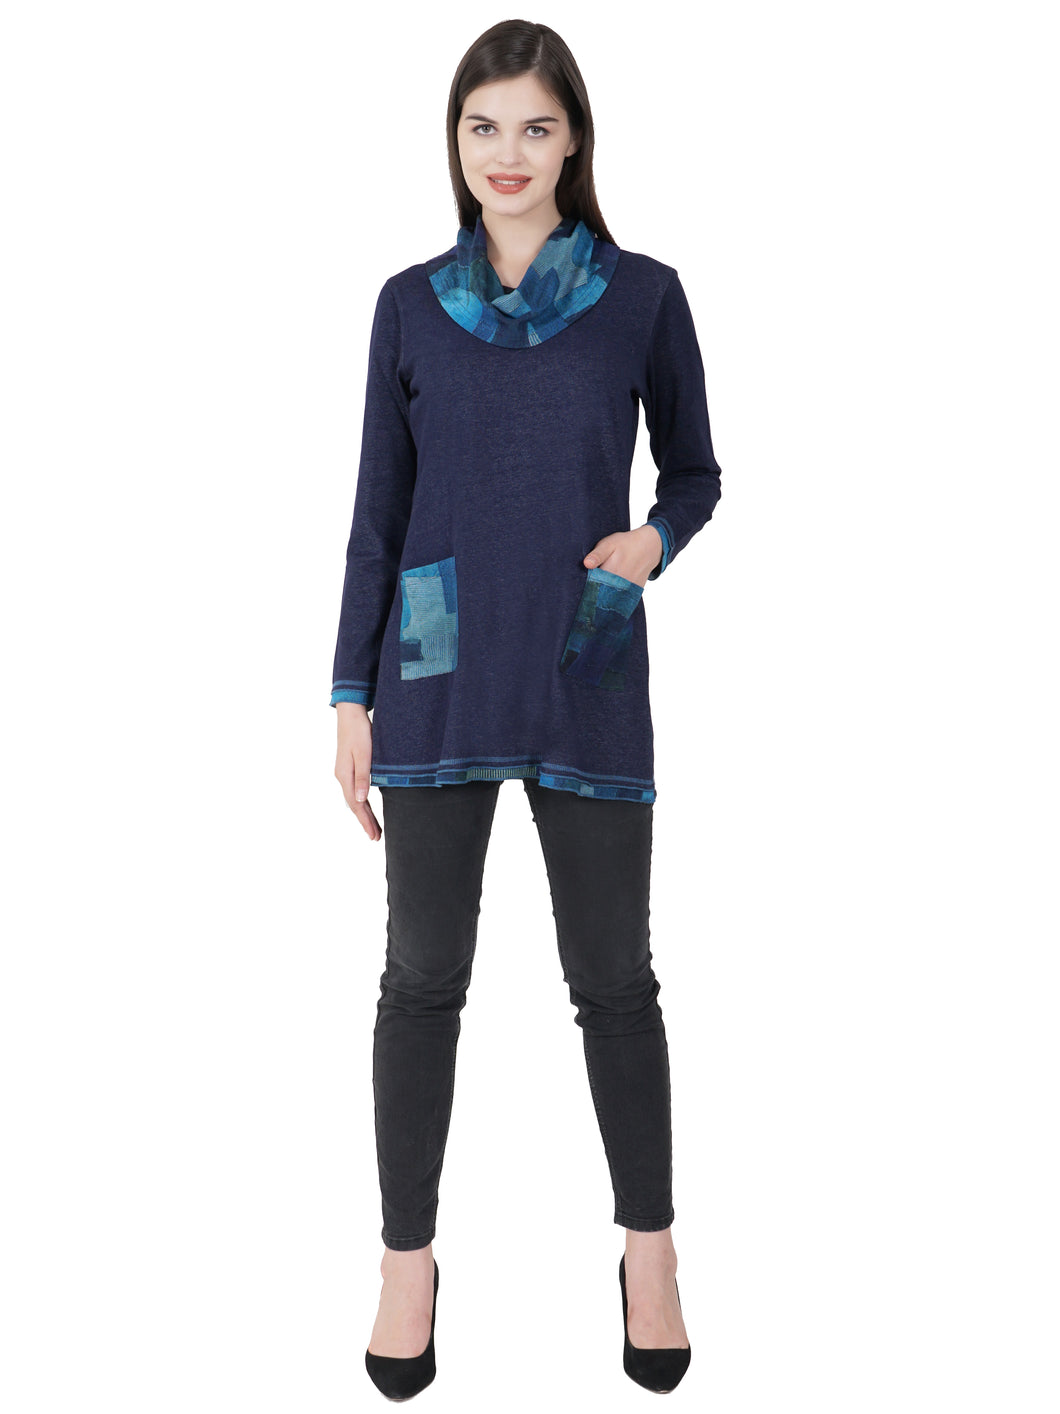 Cowl Neck Tunic by Parsley and Sage (available in plus sizes)